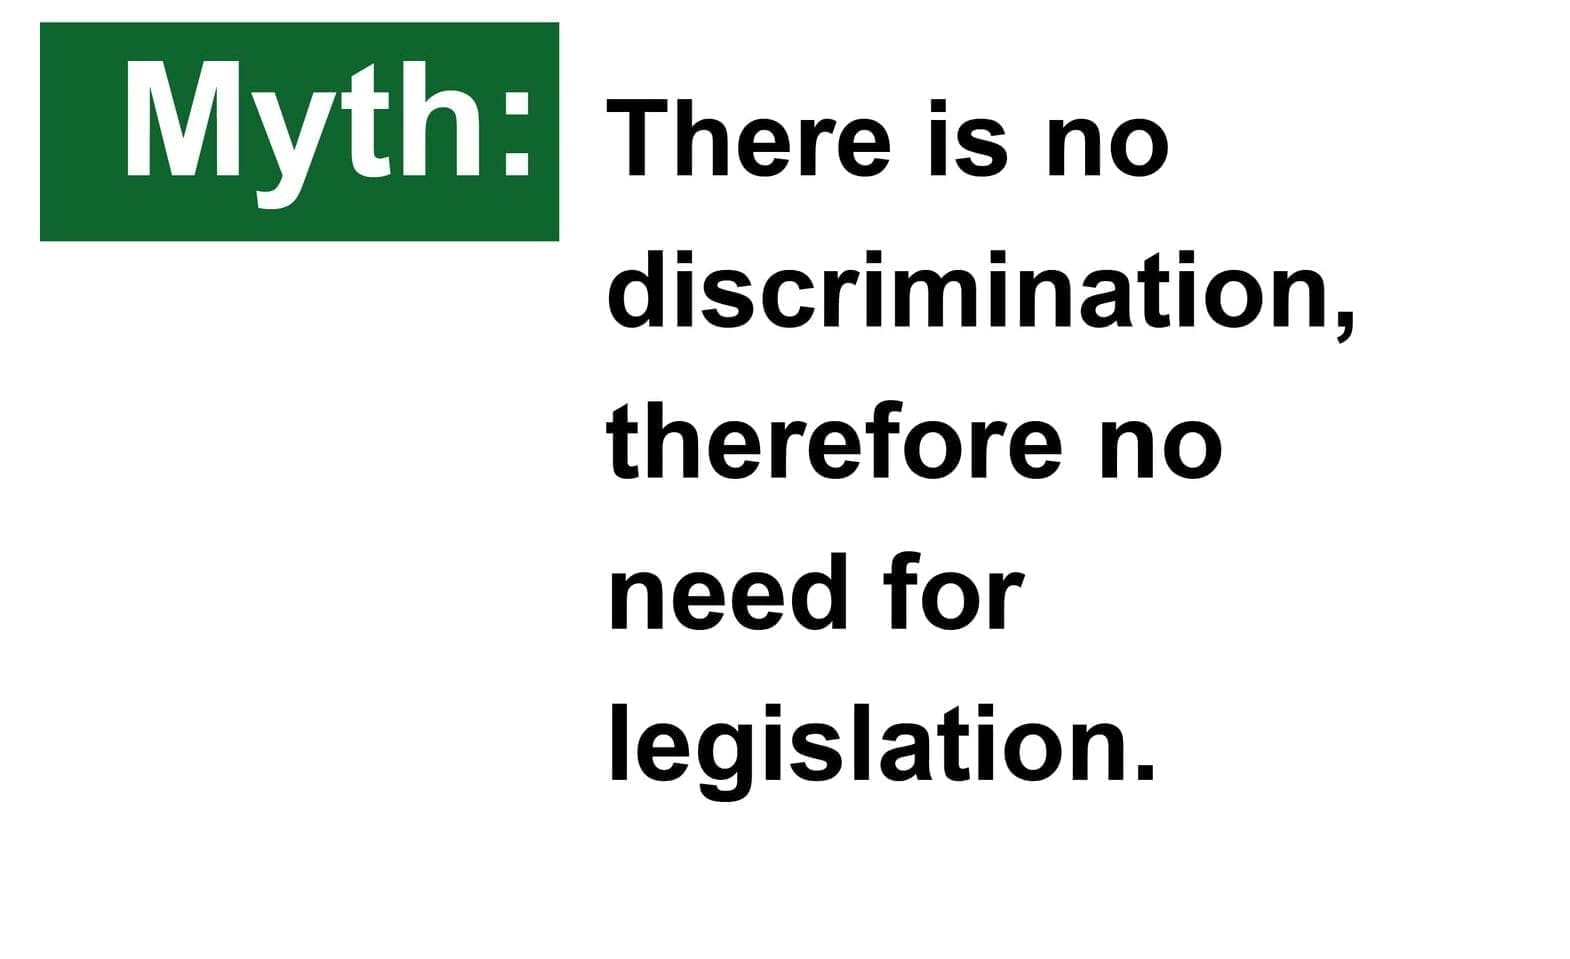 Click on image to go to human rights and discrimination frequently asked questions page 